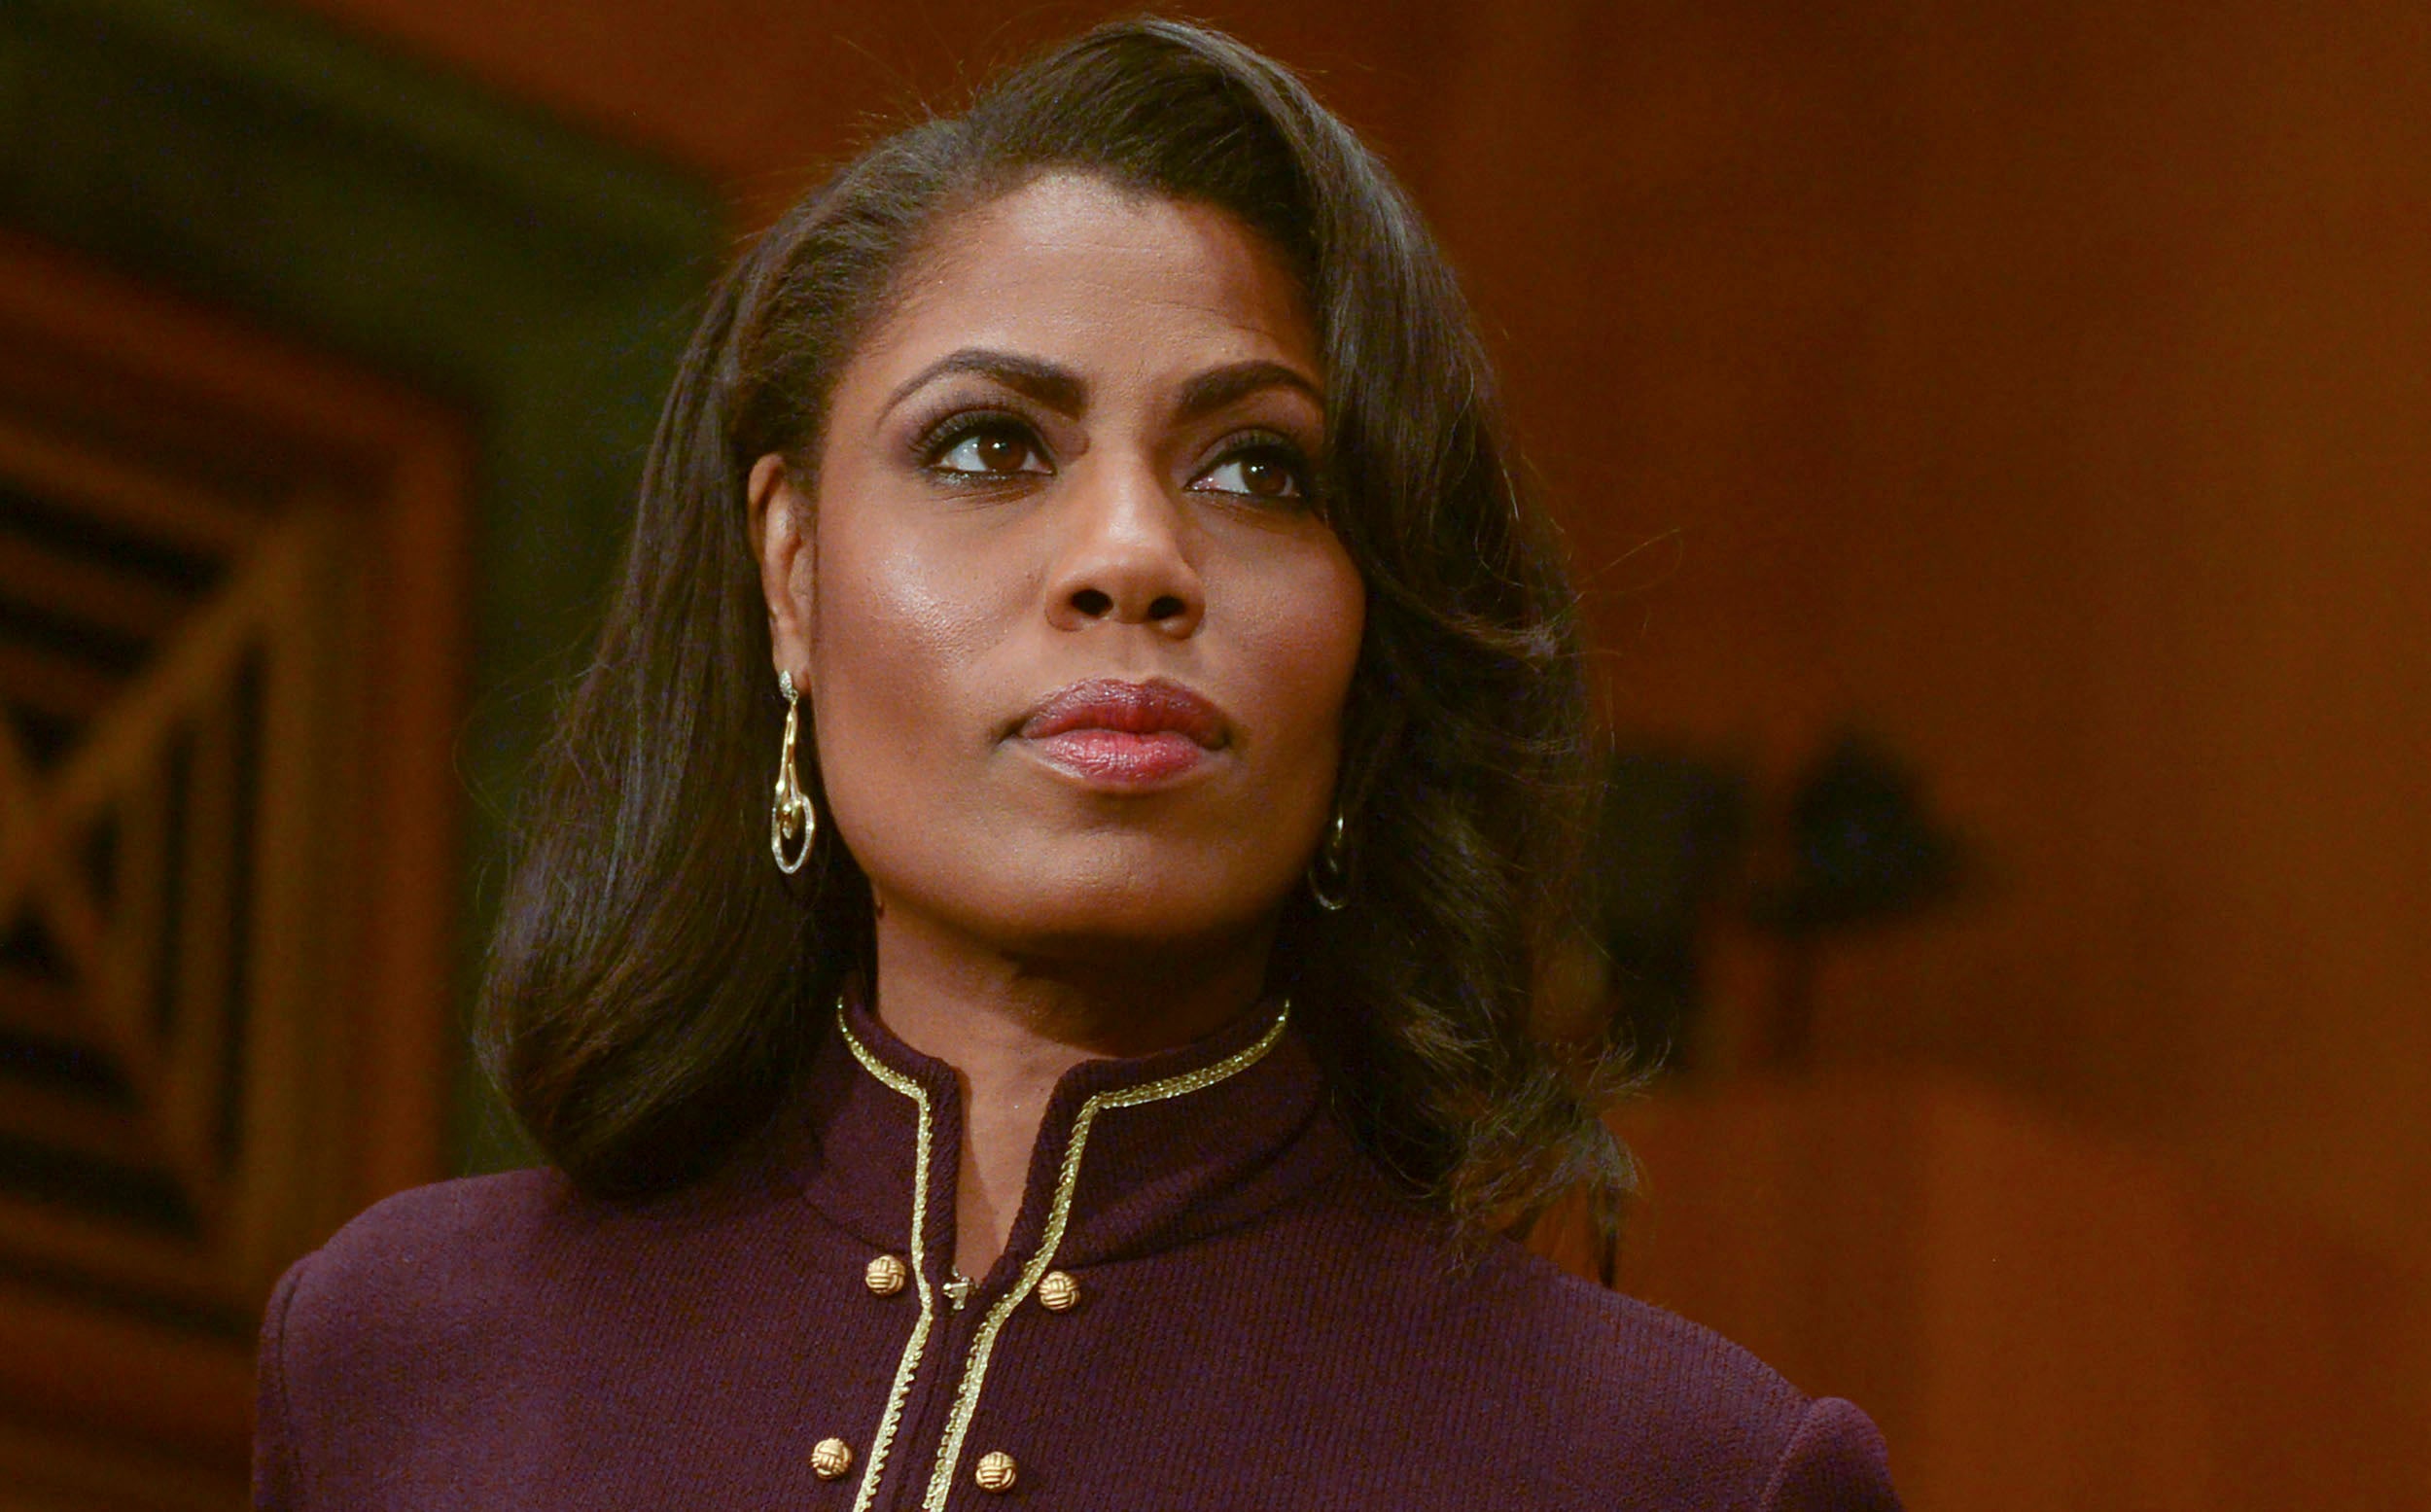 When Did Omarosa Manigault Become "The Honorable?"